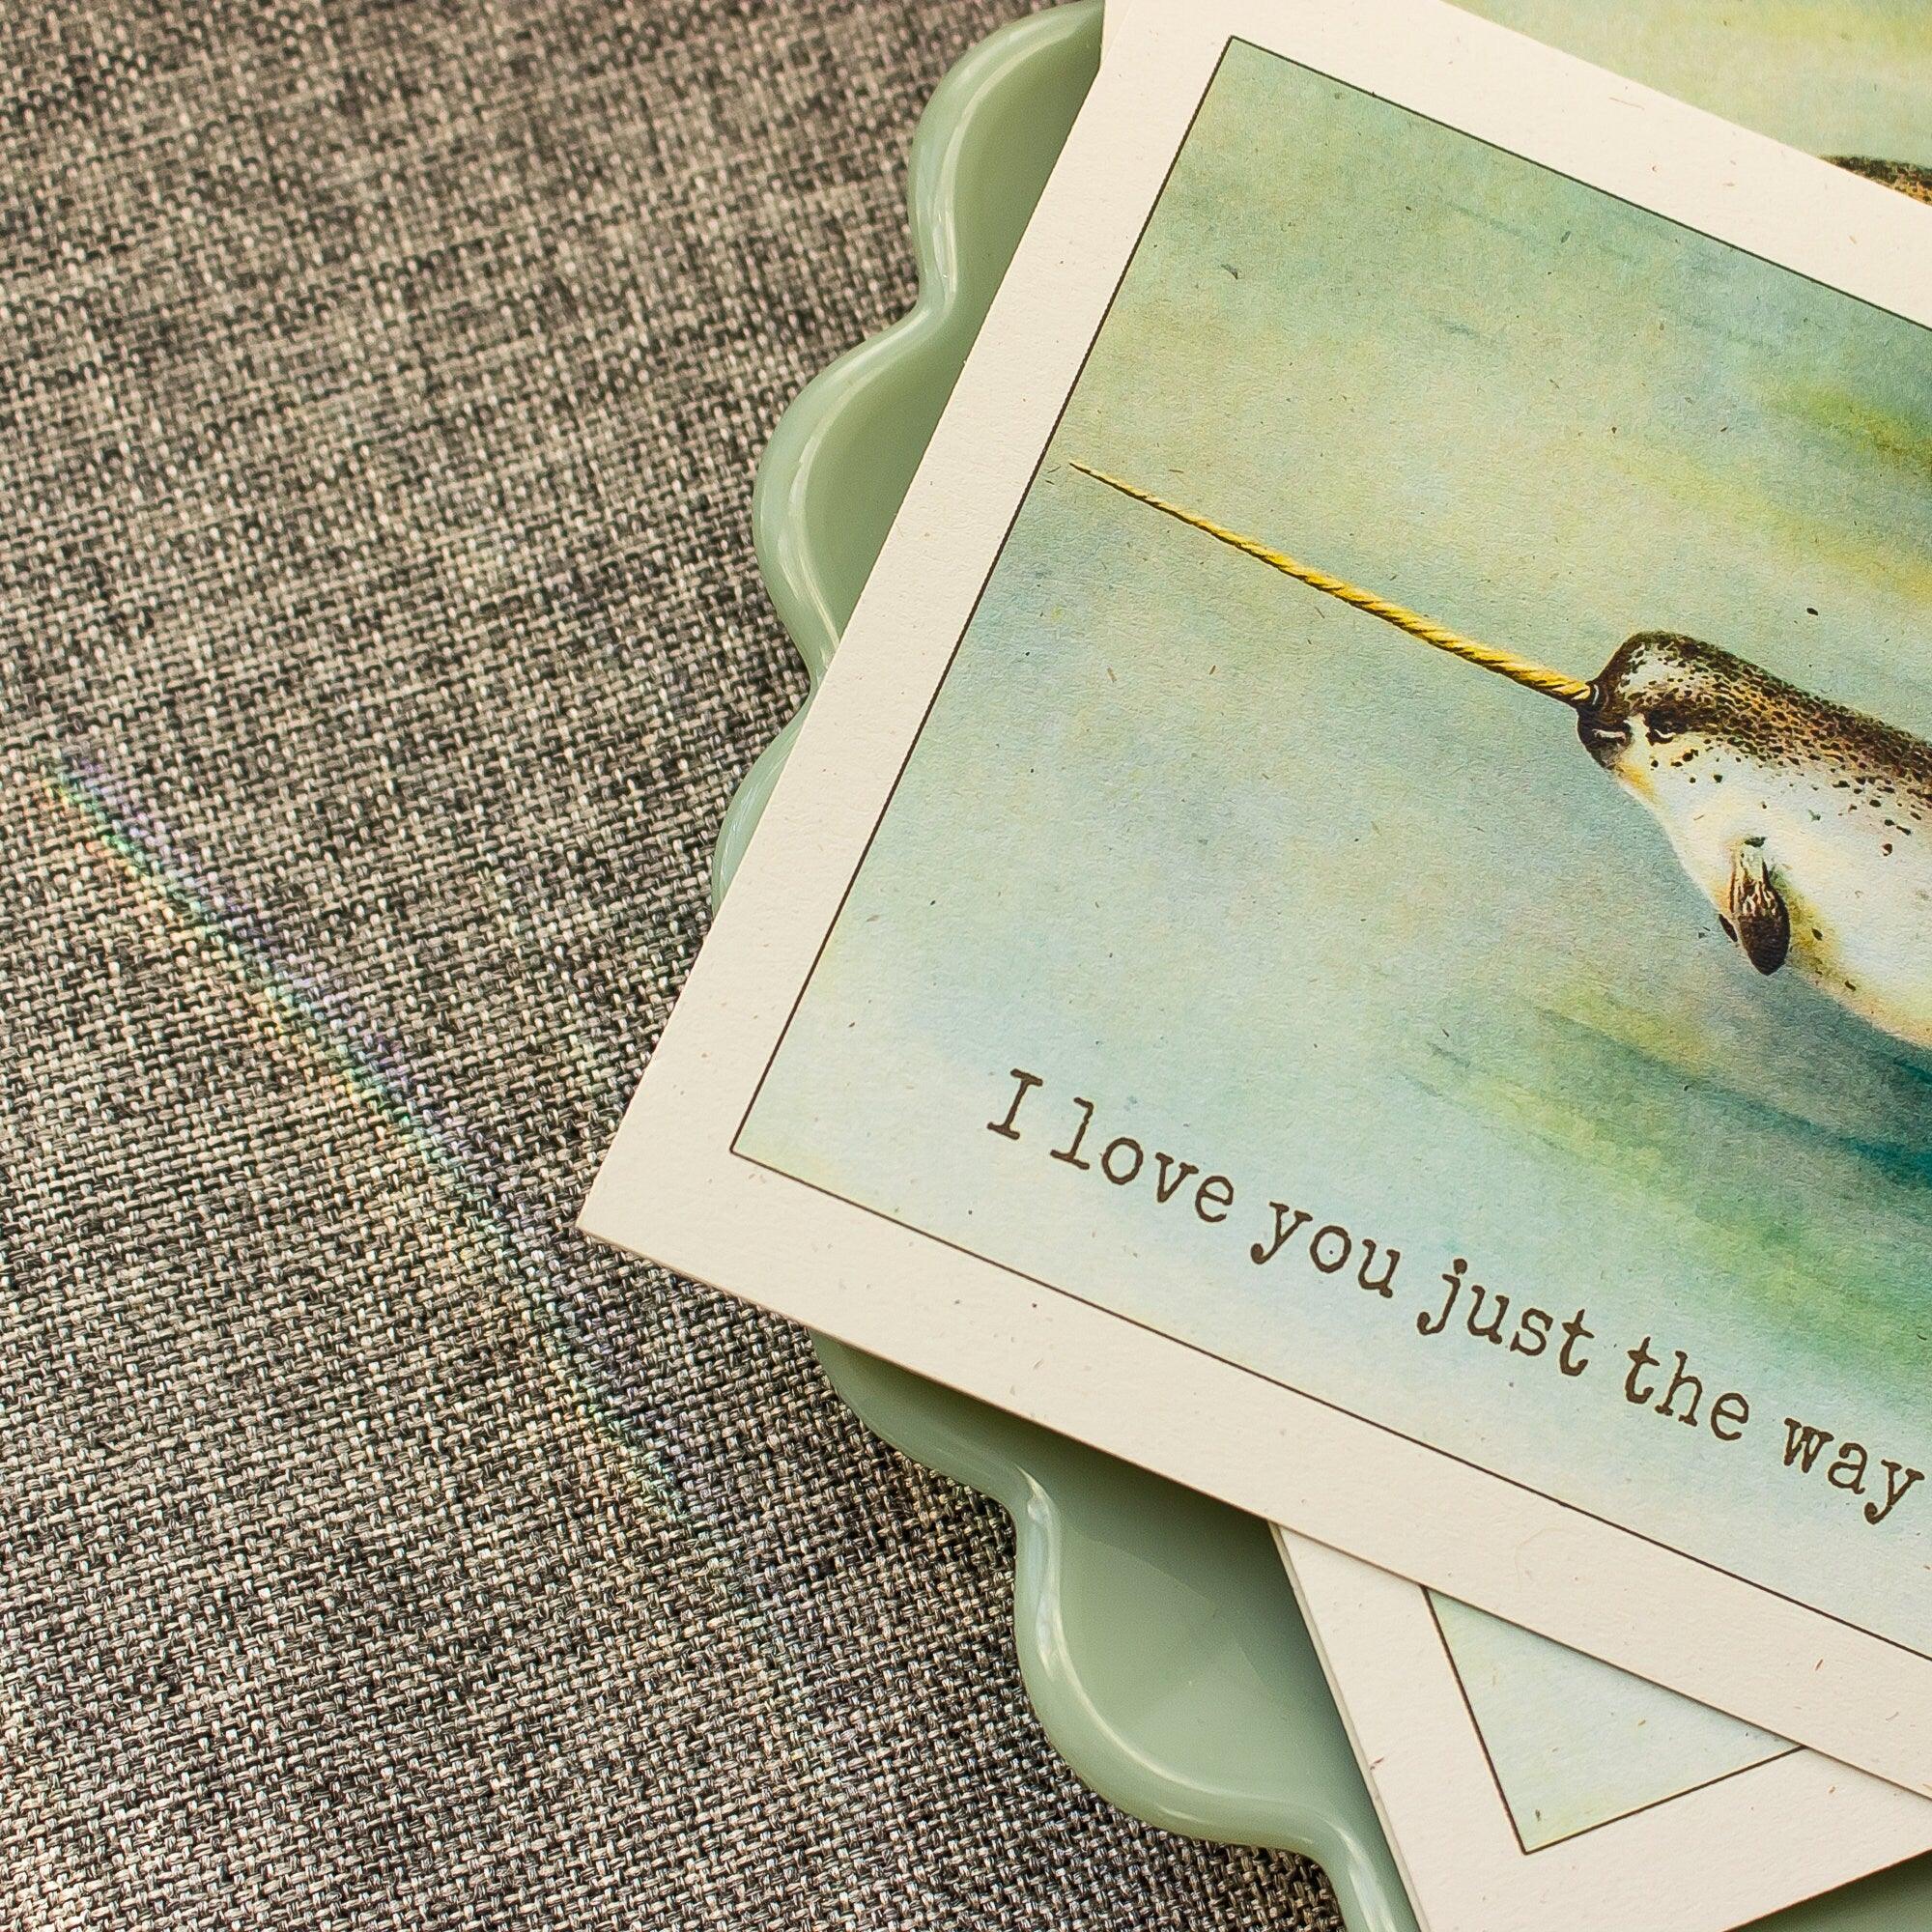 Narwhal Greeting Card - Whimsical Love Card - Love You Just the Way You Are